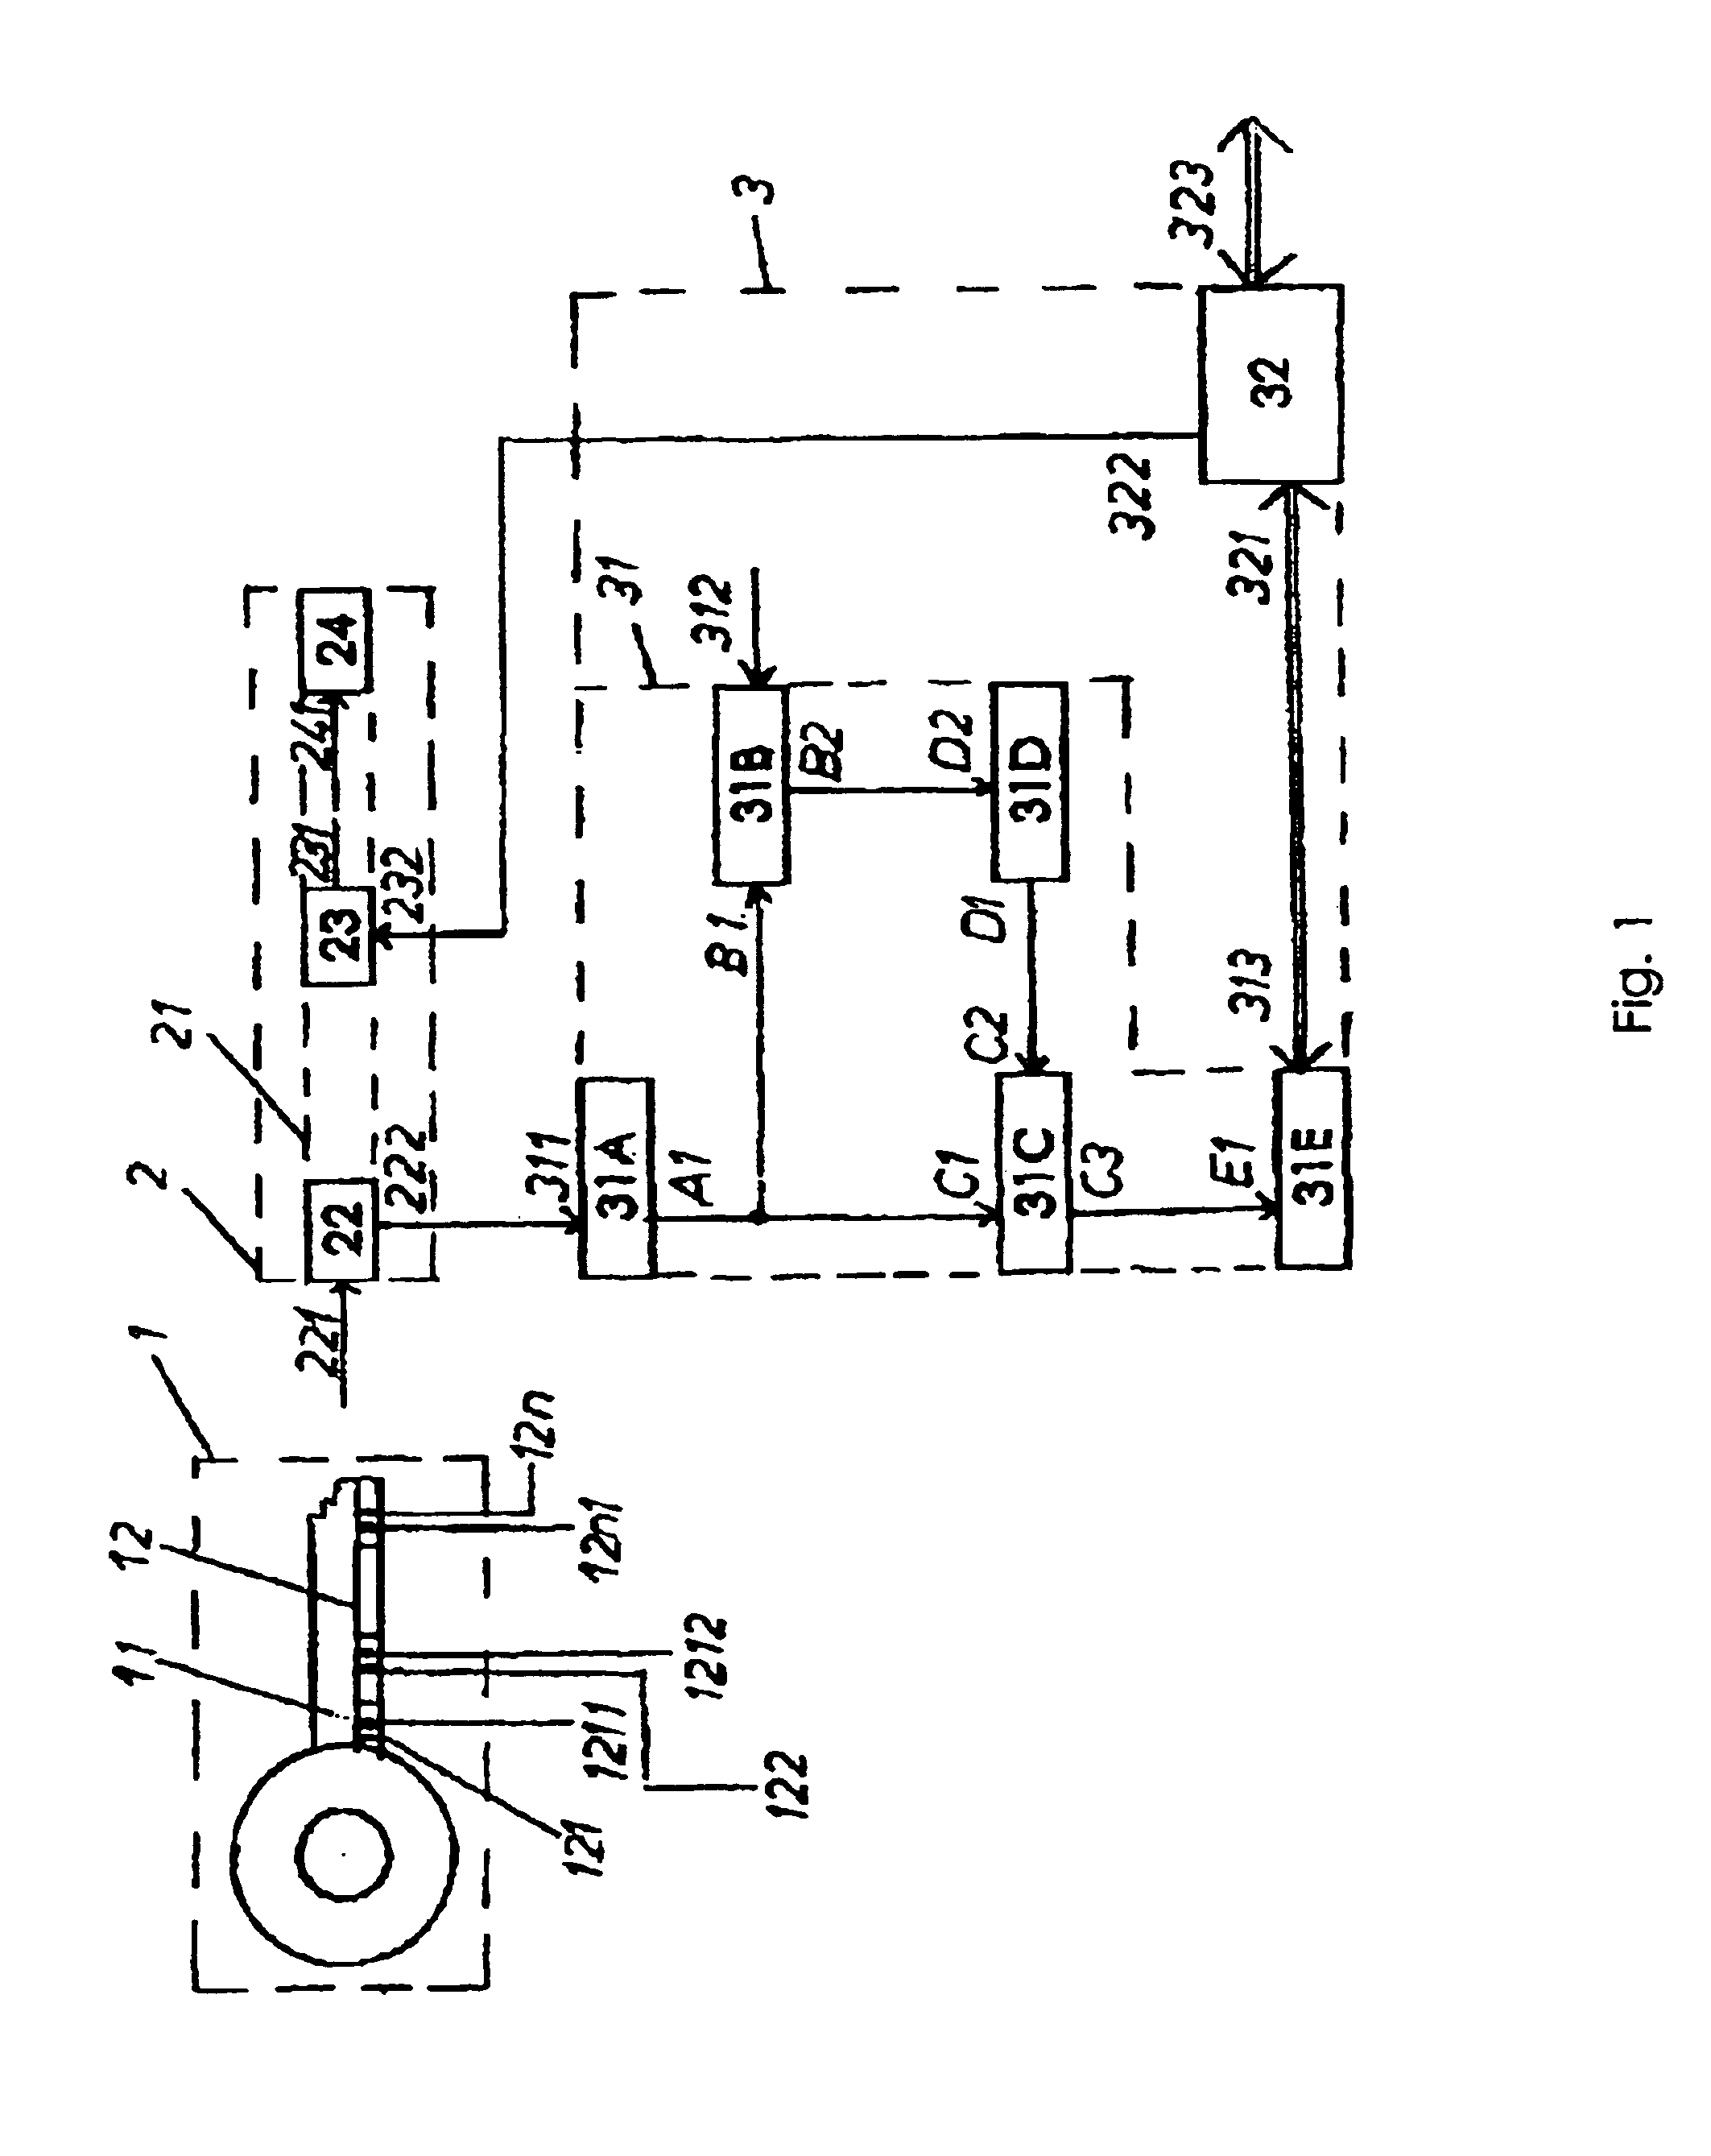 Electronically tested high-security coding and decoding device